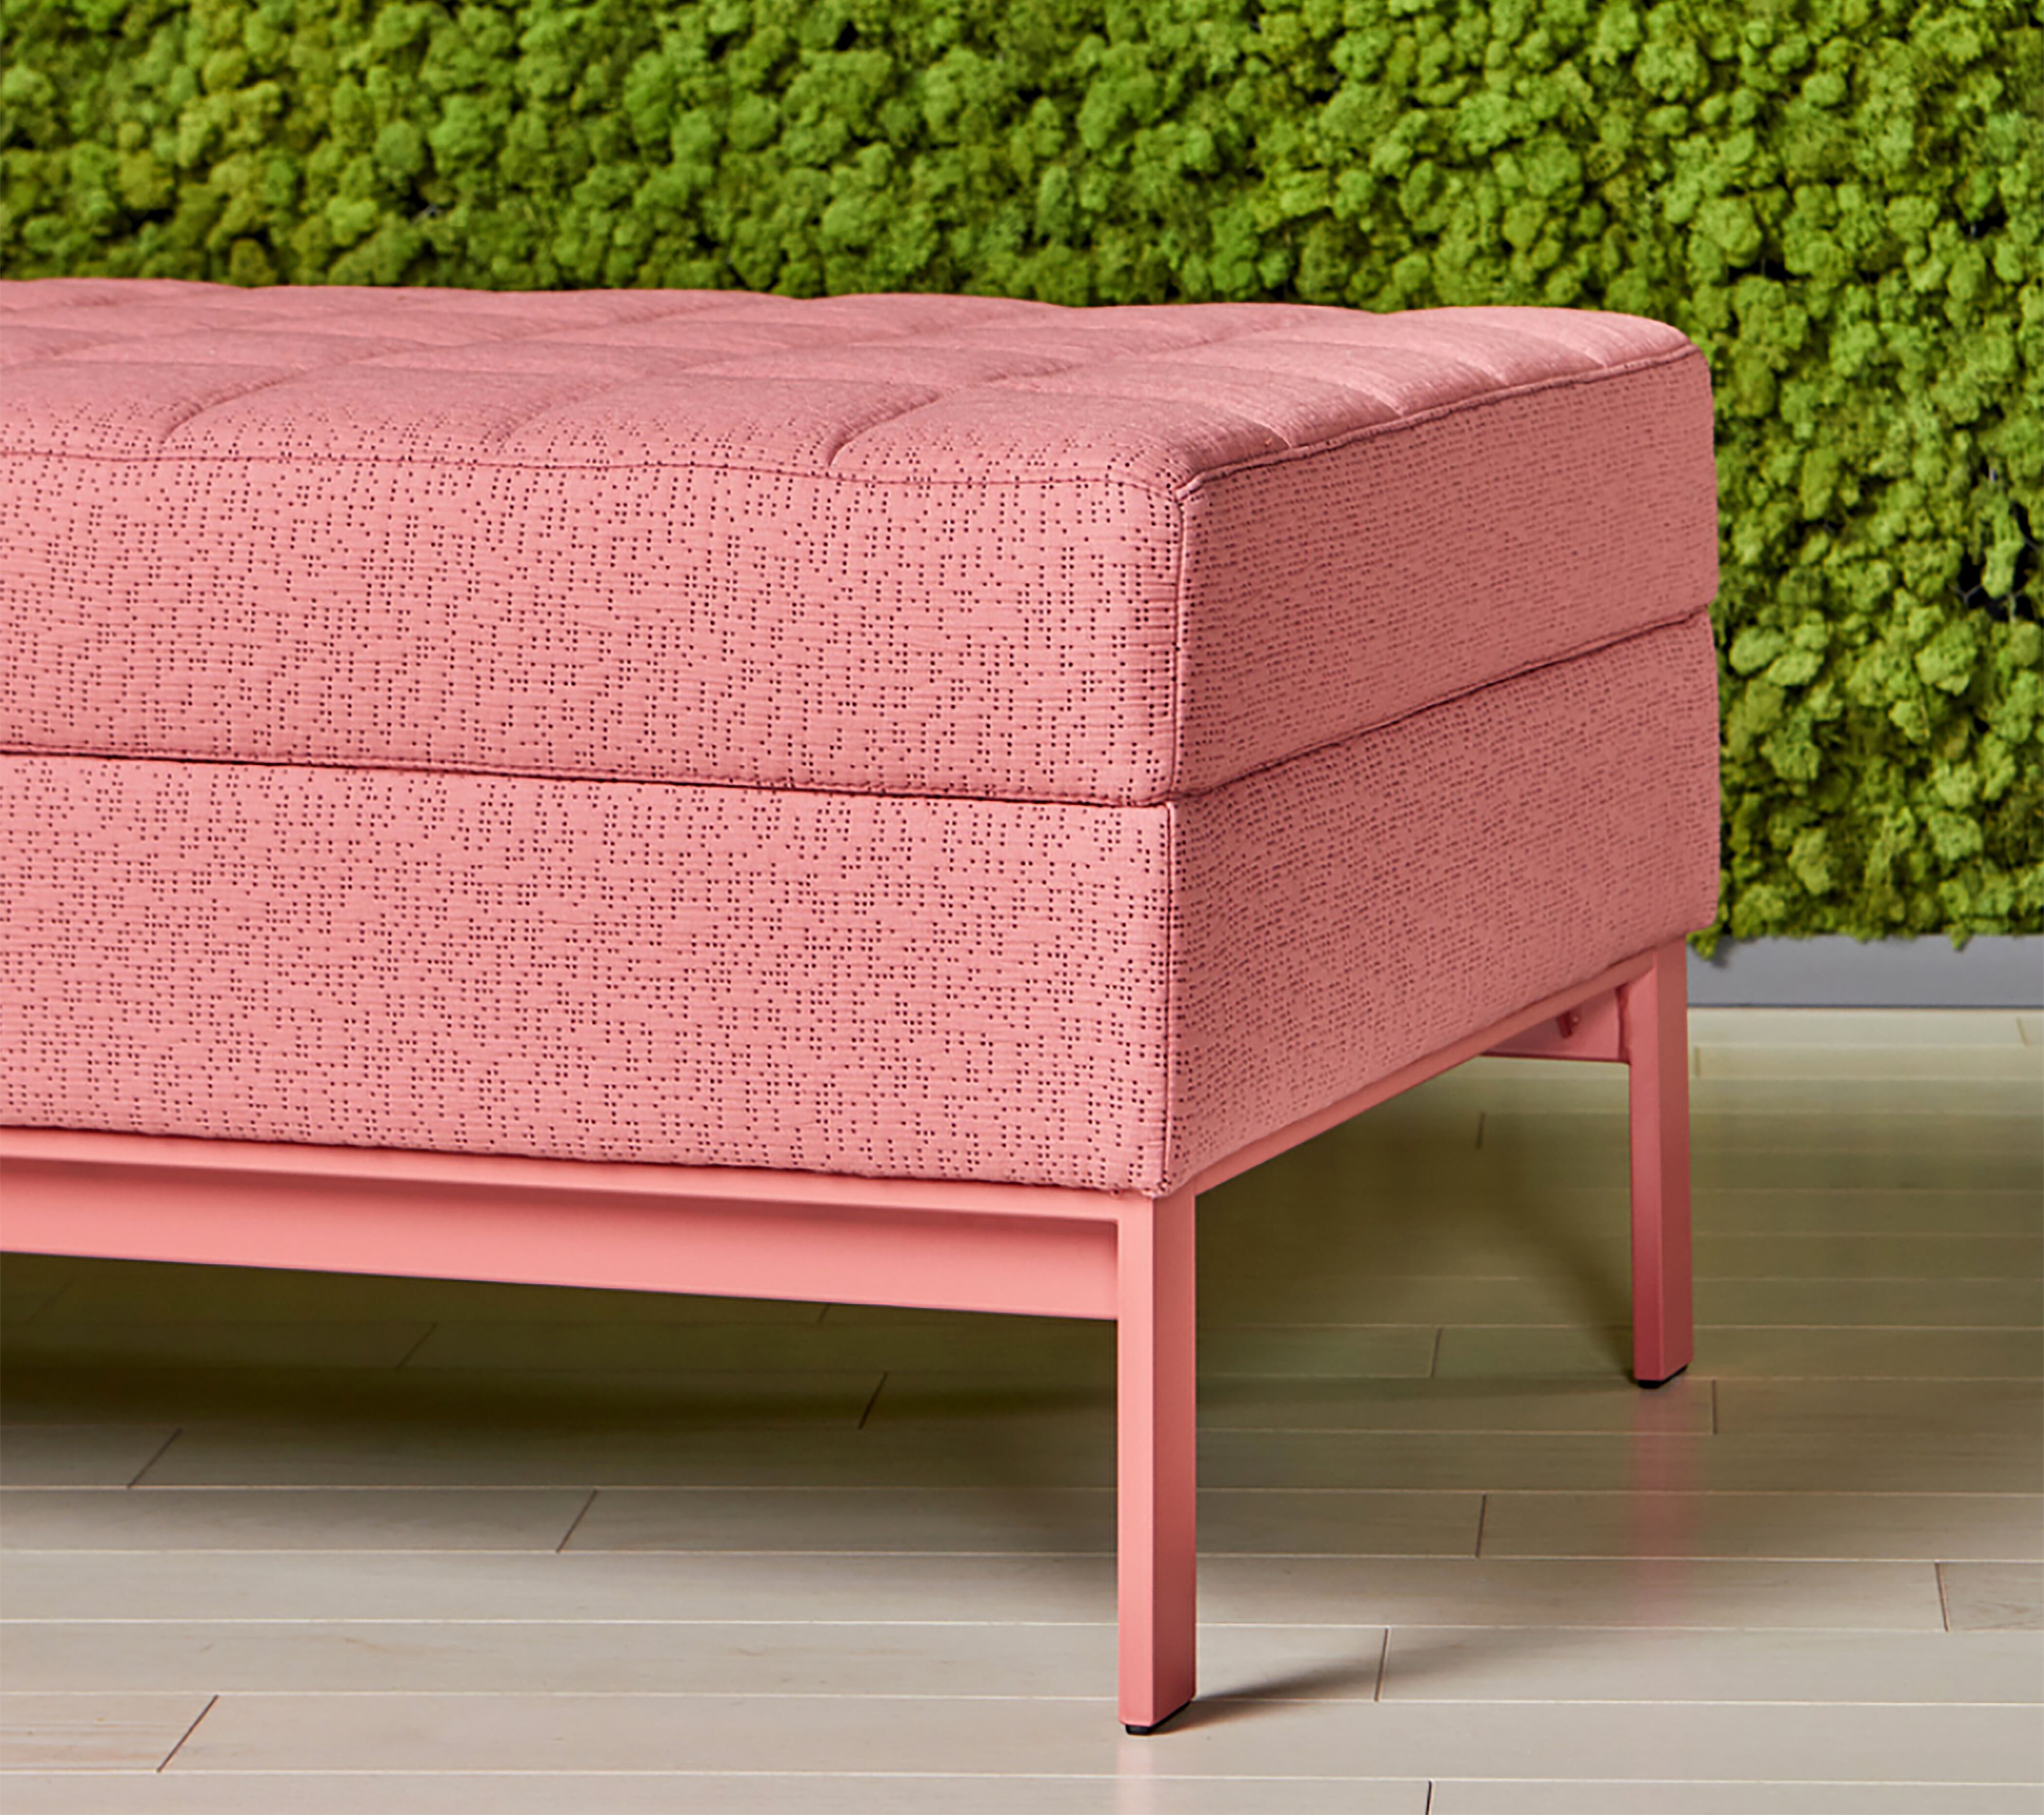 Designtex and Coalesse New textile collection on pink ottoman